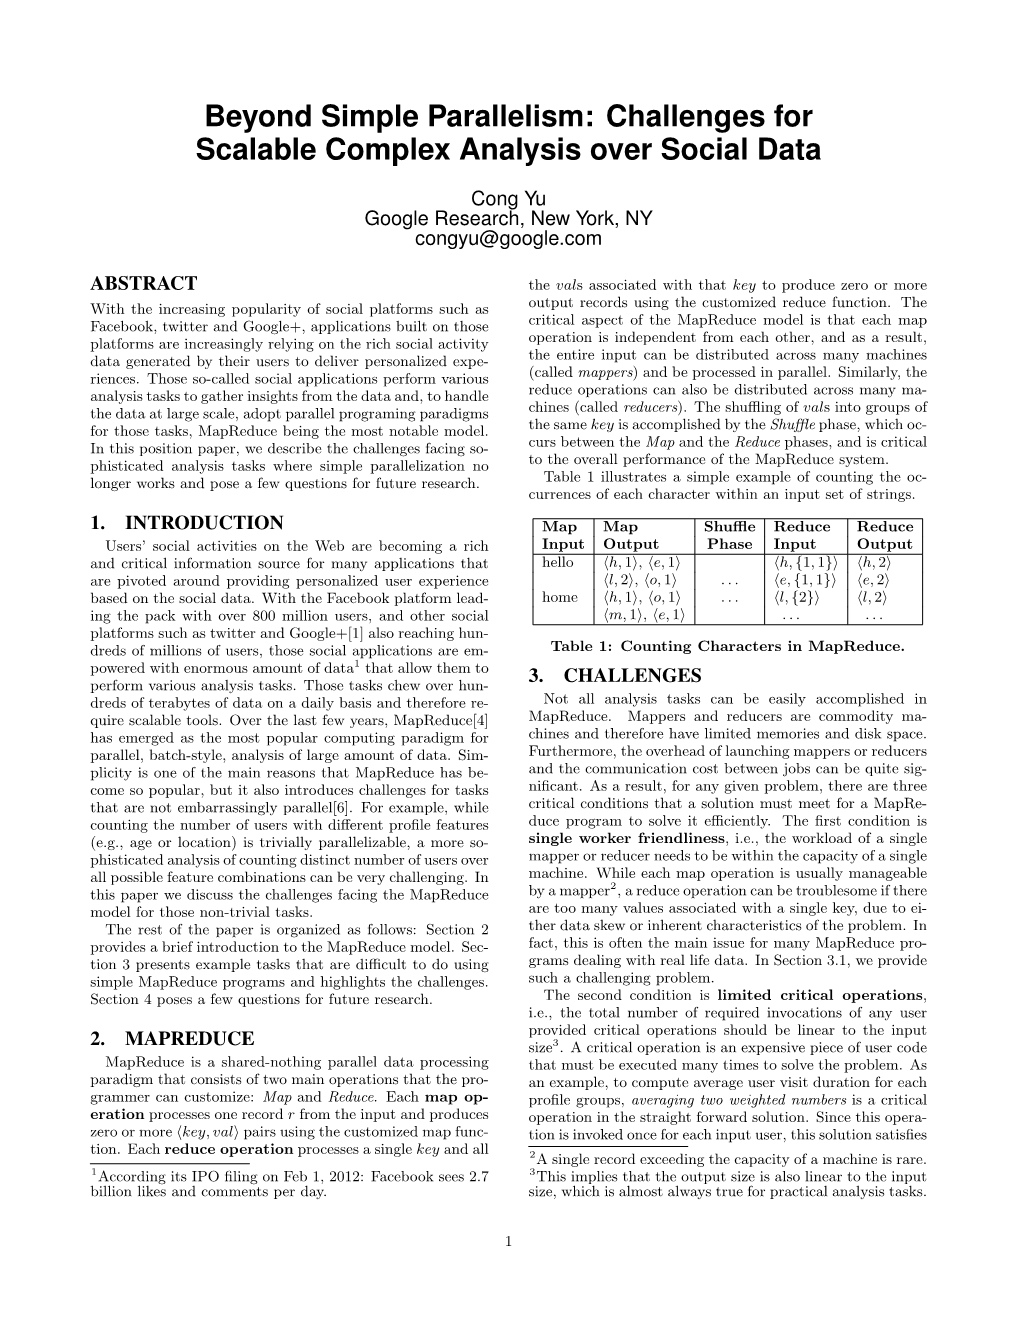 Beyond Simple Parallelism: Challenges for Scalable Complex Analysis Over Social Data